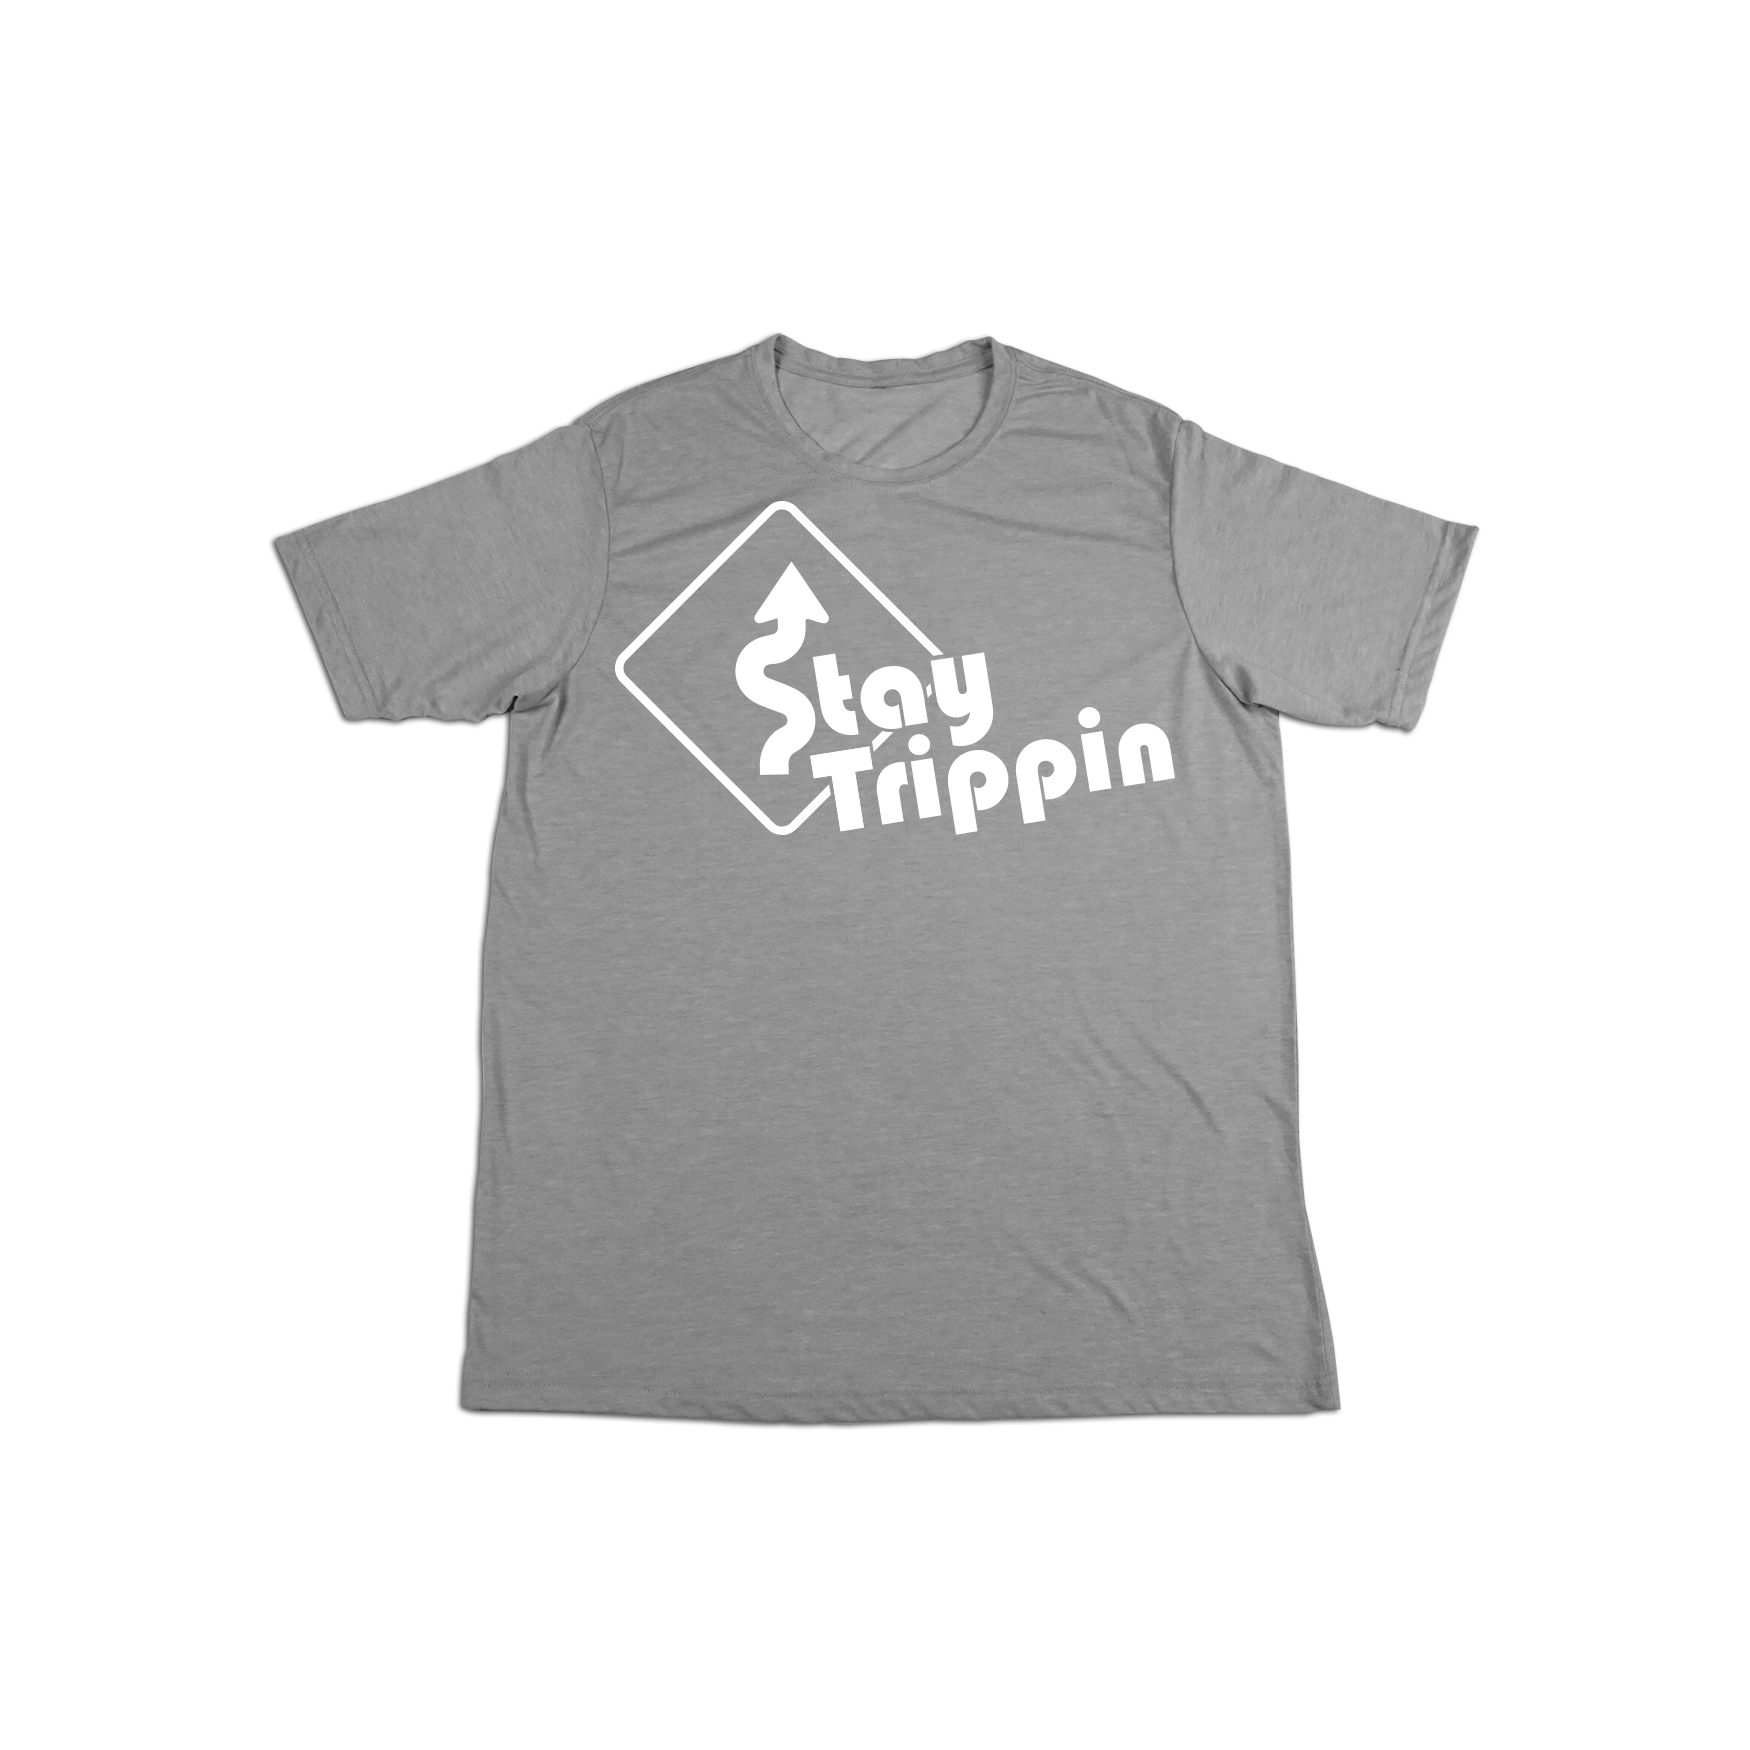 #STAYTRIPPIN SIGN YOUTH Soft Shirt - Hat Mount for GoPro